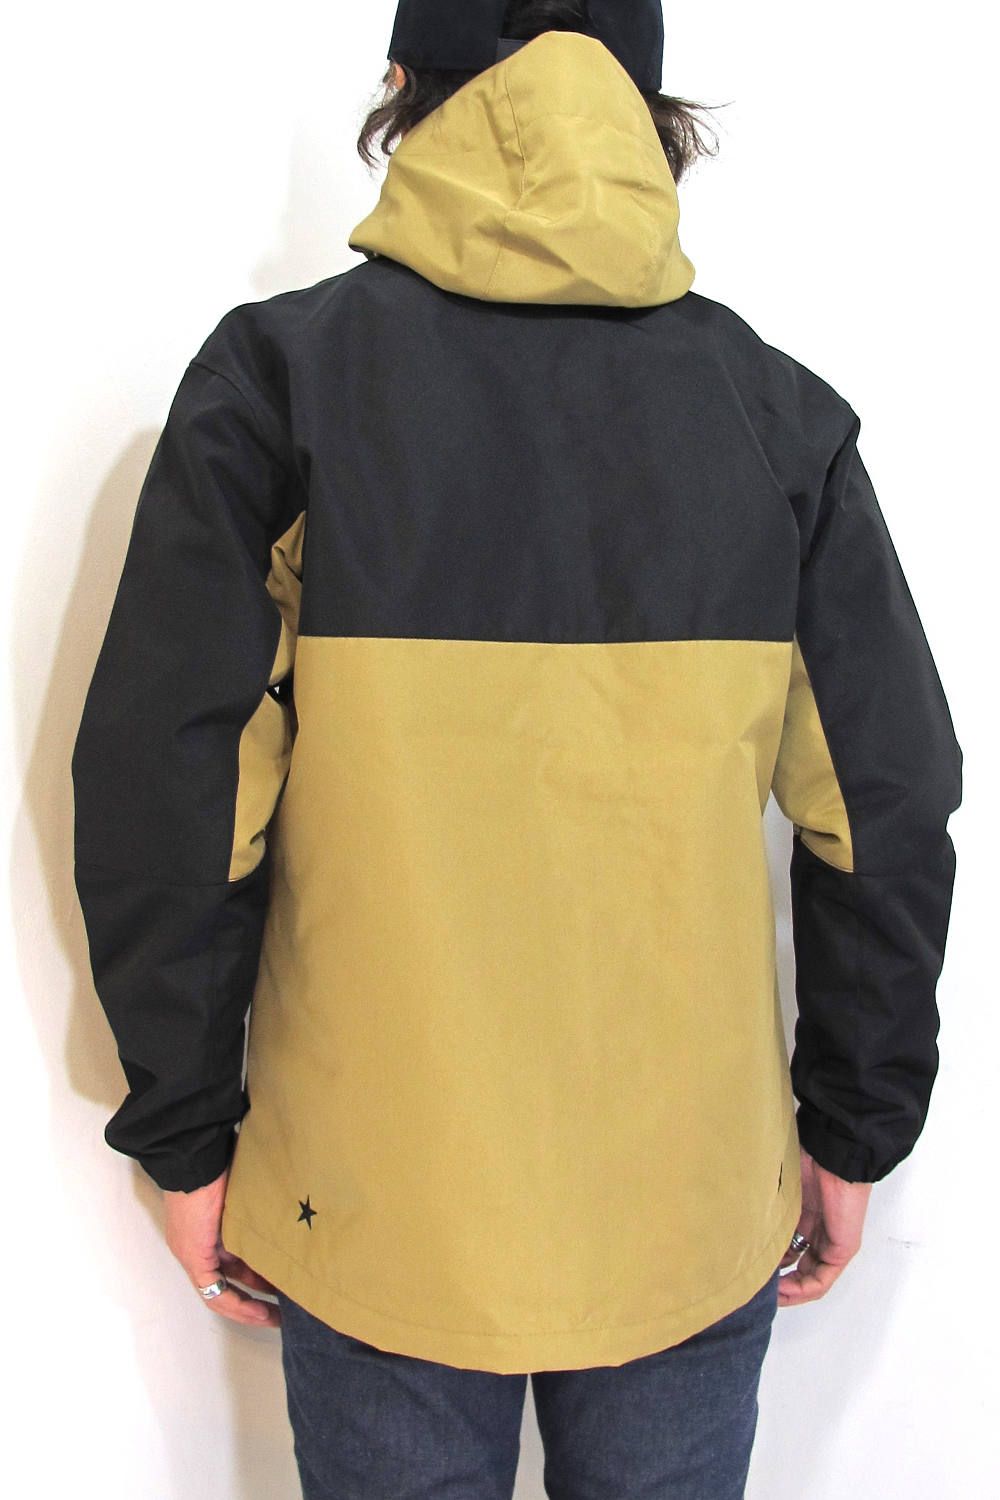 SWITCHING SHELL HOODIE (BROWN/BLACK) / 2トーン マウンテンパーカー - S